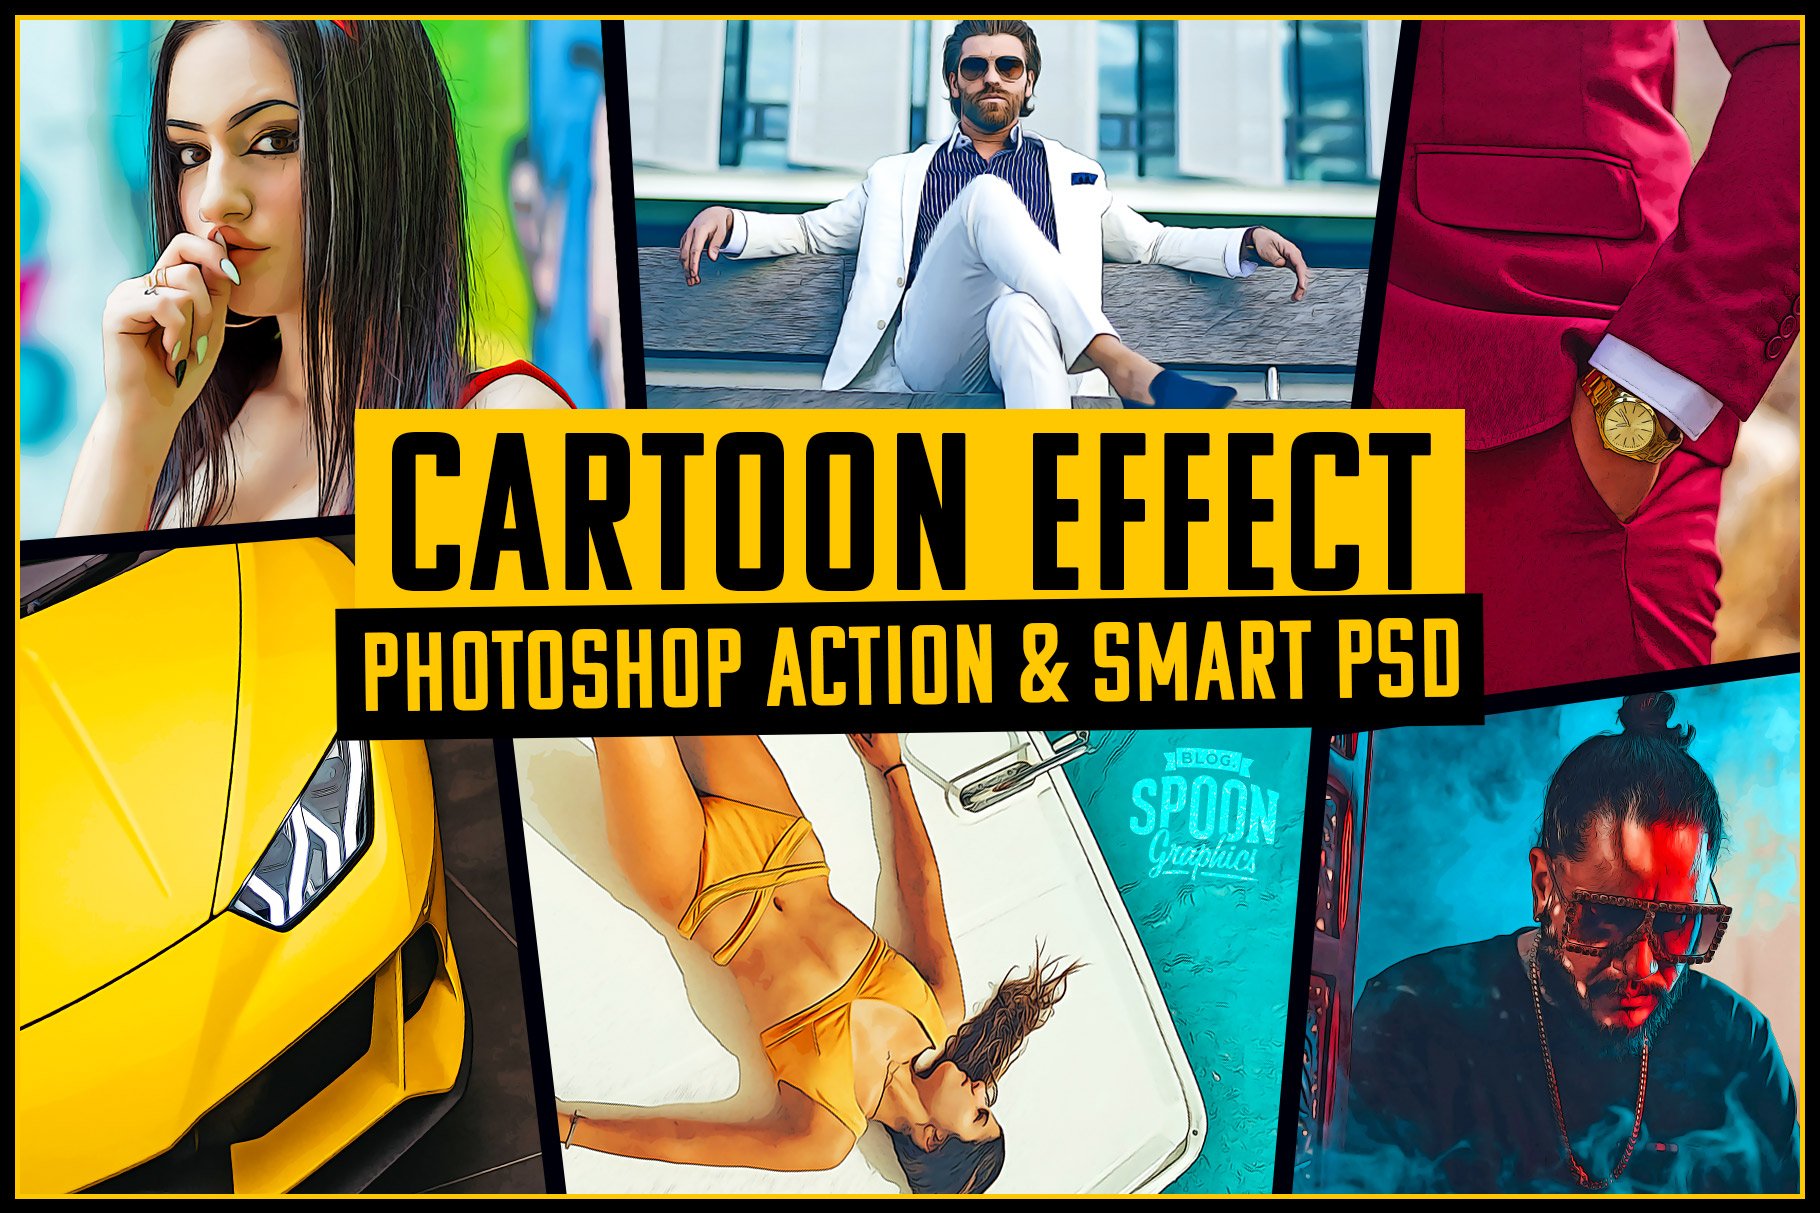 Cartoon Effect Photoshop Actioncover image.